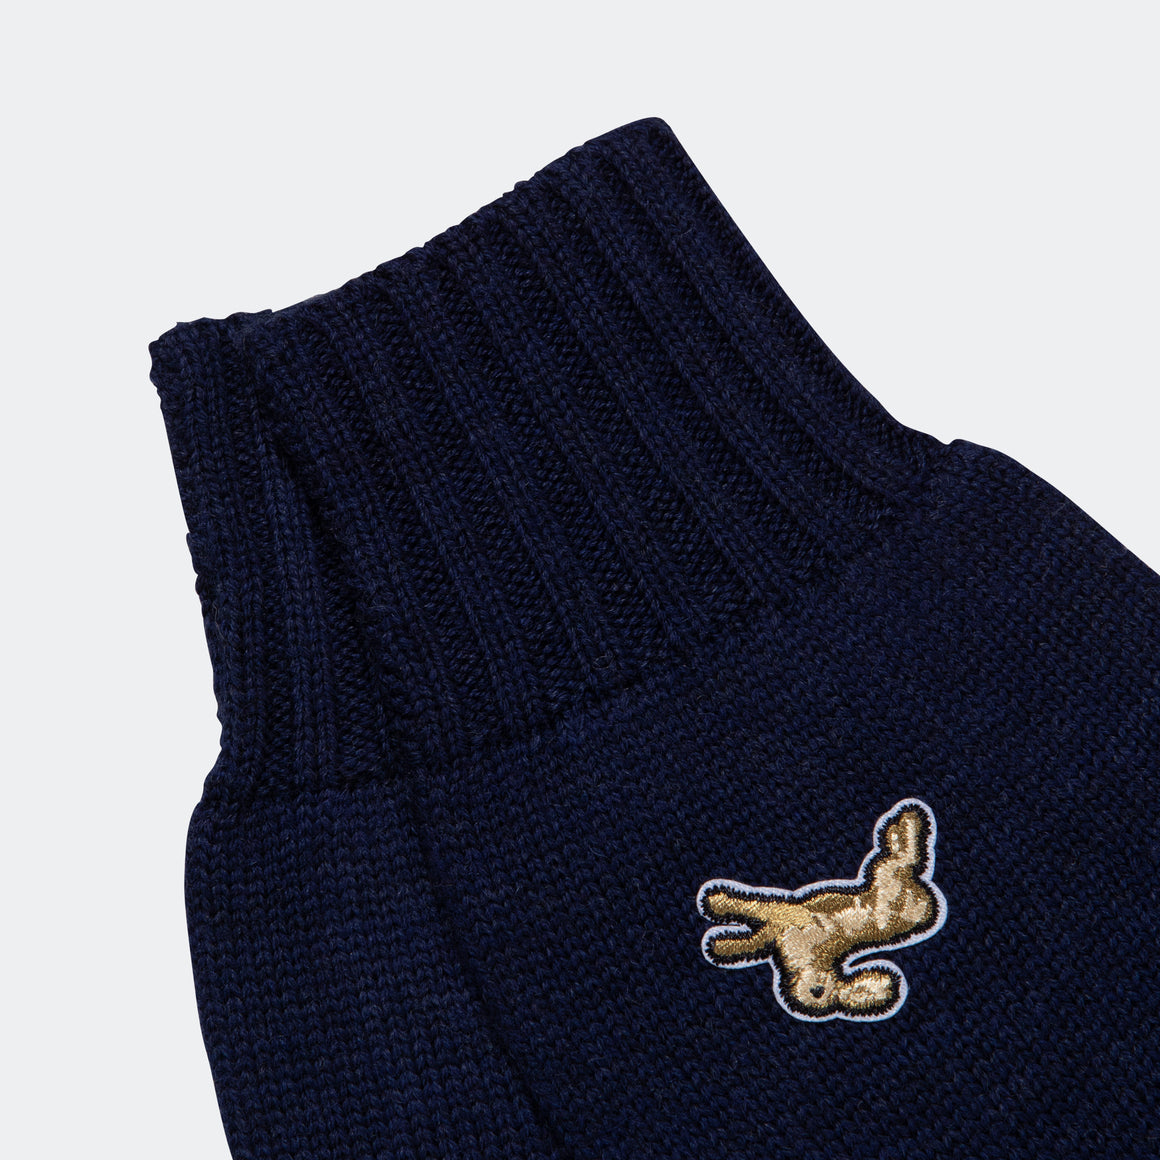 Tracksmith - Harrier Gloves - Navy - Up There Athletics